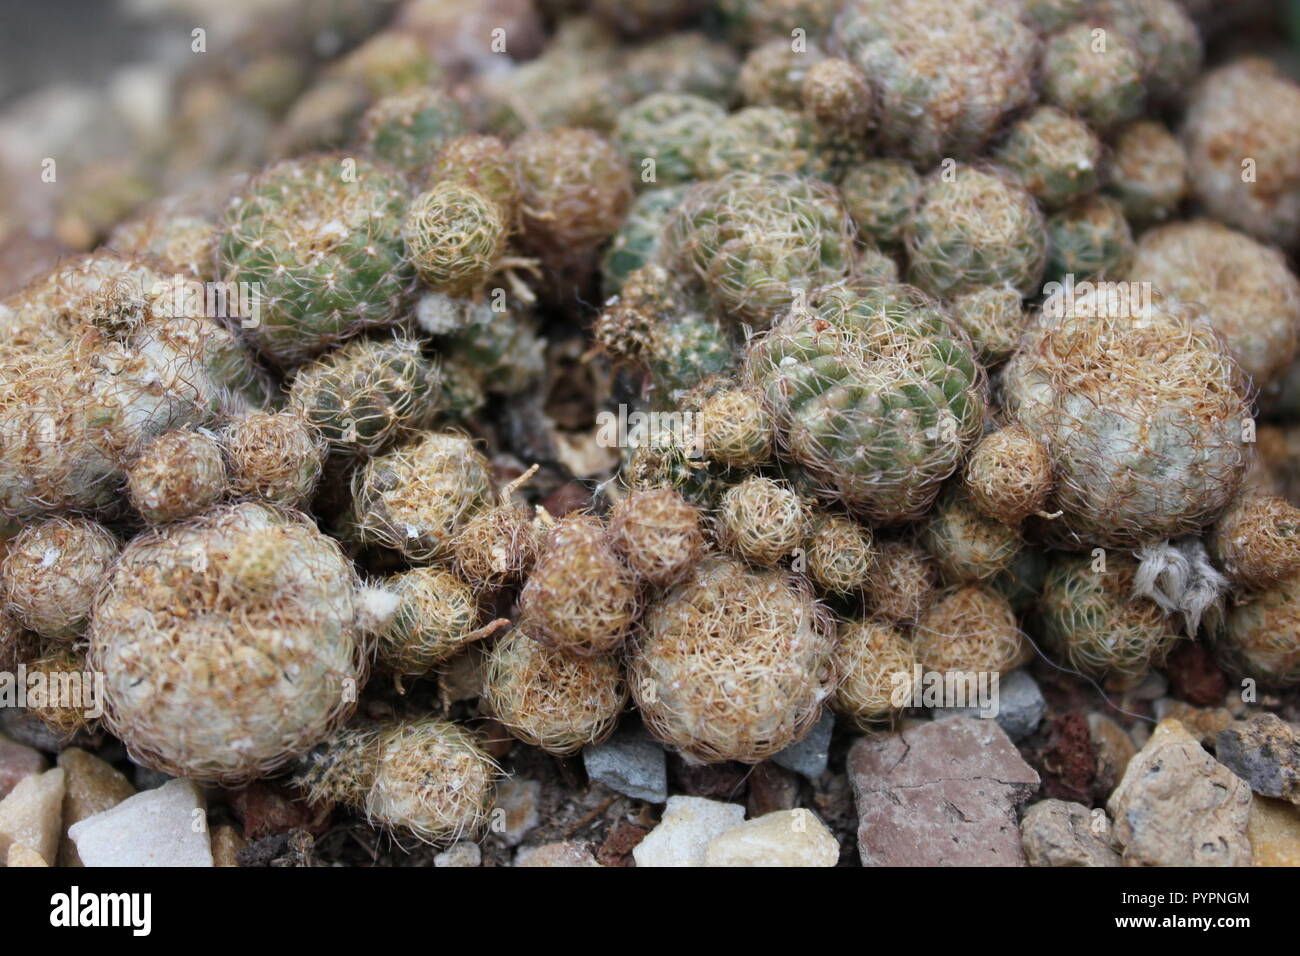 Clustered sulcor, rebutia pulchra, cactus desert plant growing in the meadow. Stock Photo